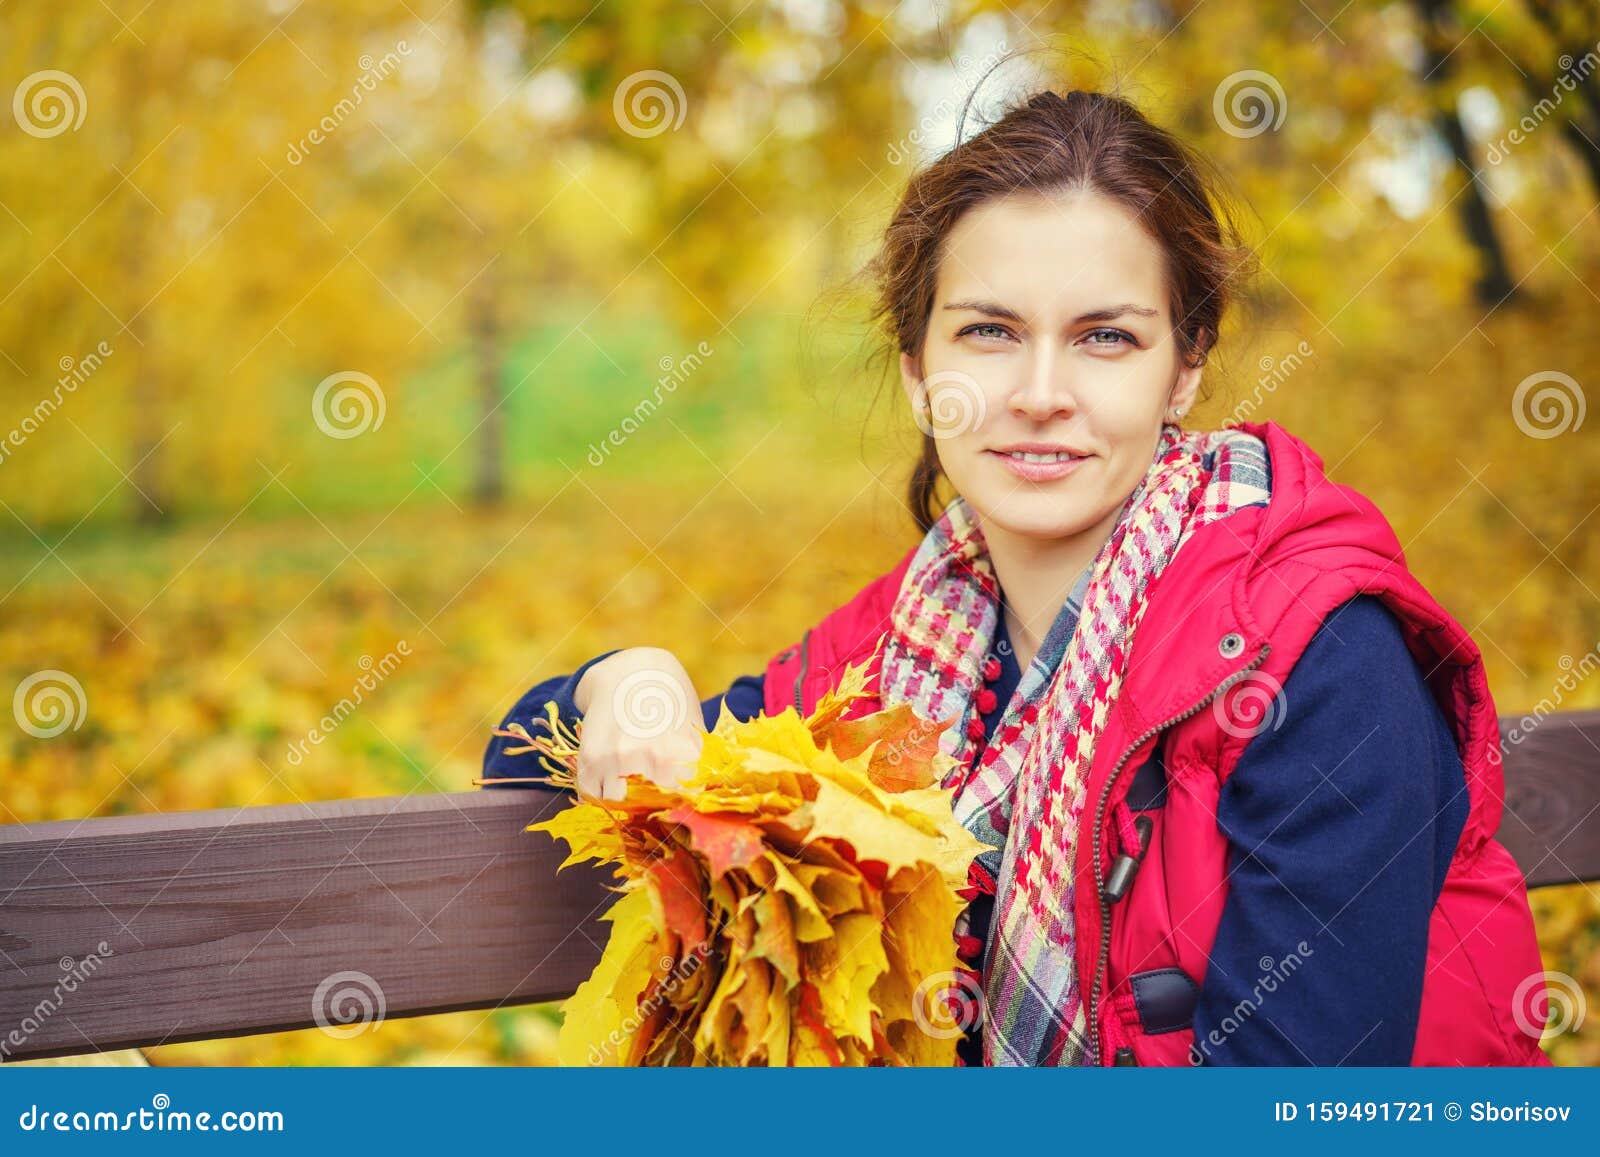 Portrait of Young Beautiful Woman in Autumn Park Stock Image - Image of ...